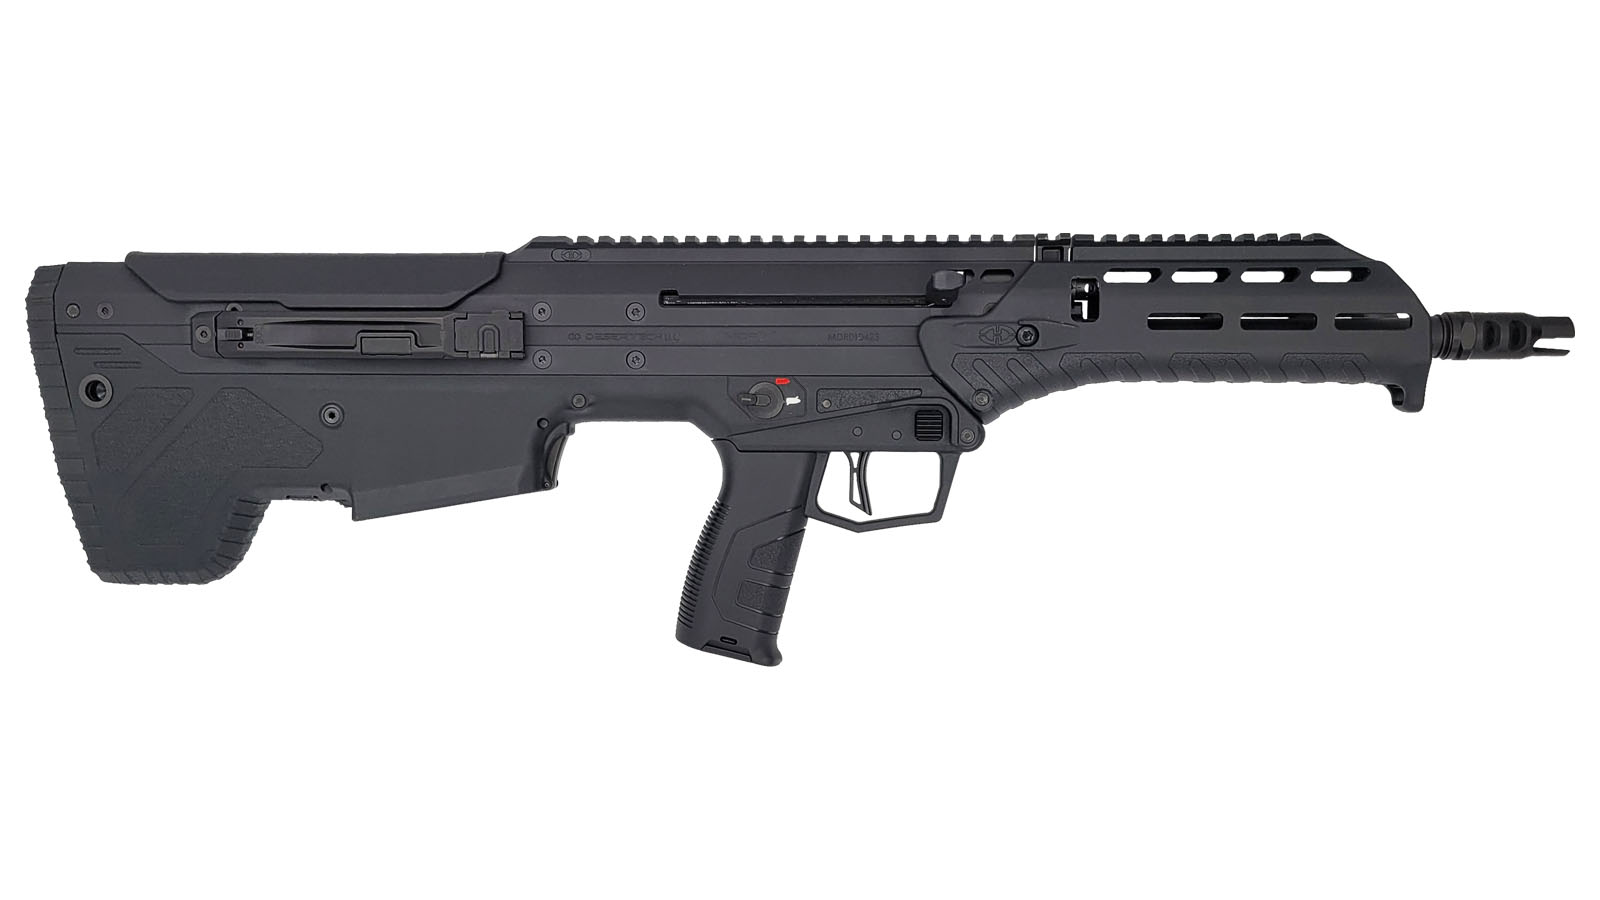 MDRx Rifle, 762NATO 308Win 16" 10rd Forward-Ejection BLK